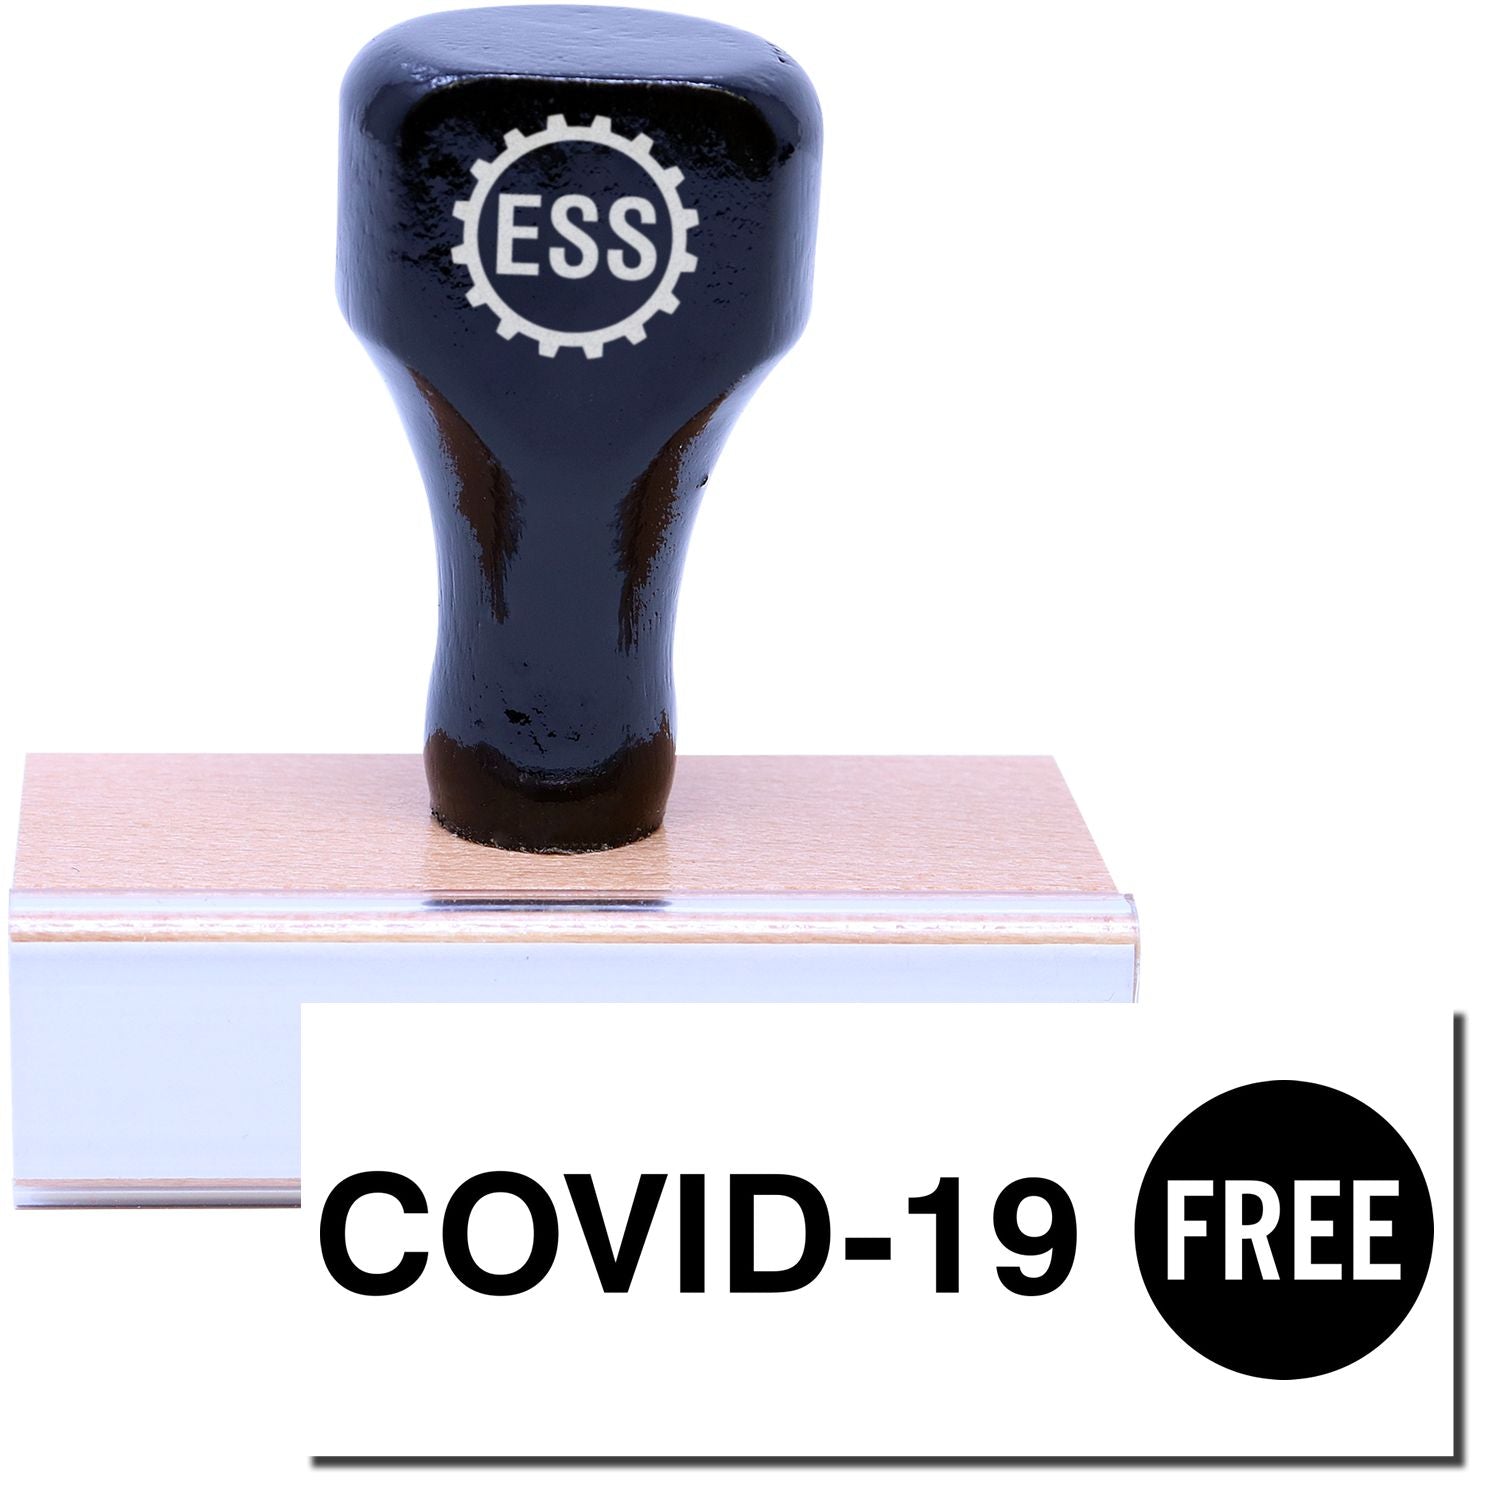 A stock office rubber stamp with a stamped image showing how the text "COVID-19 FREE" is displayed after stamping.